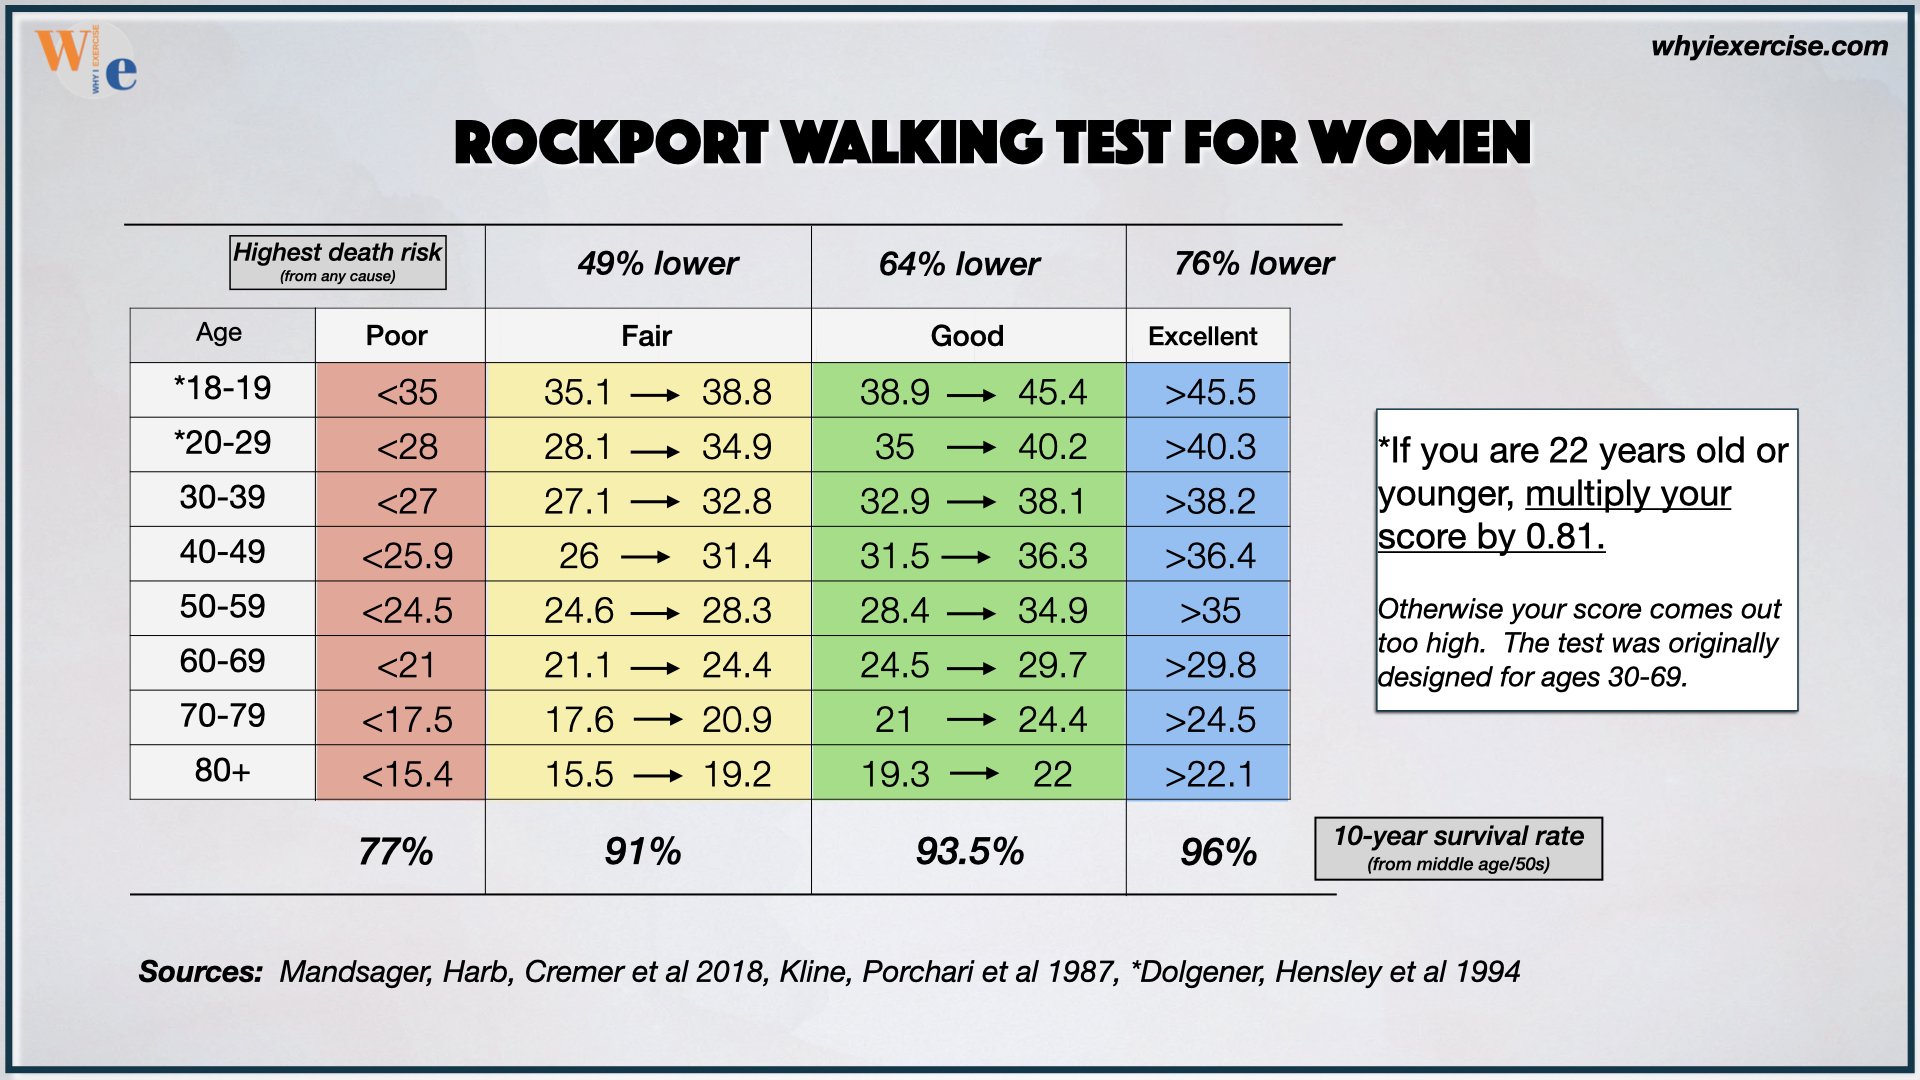 Rockport Walking Test score chart for women by age group